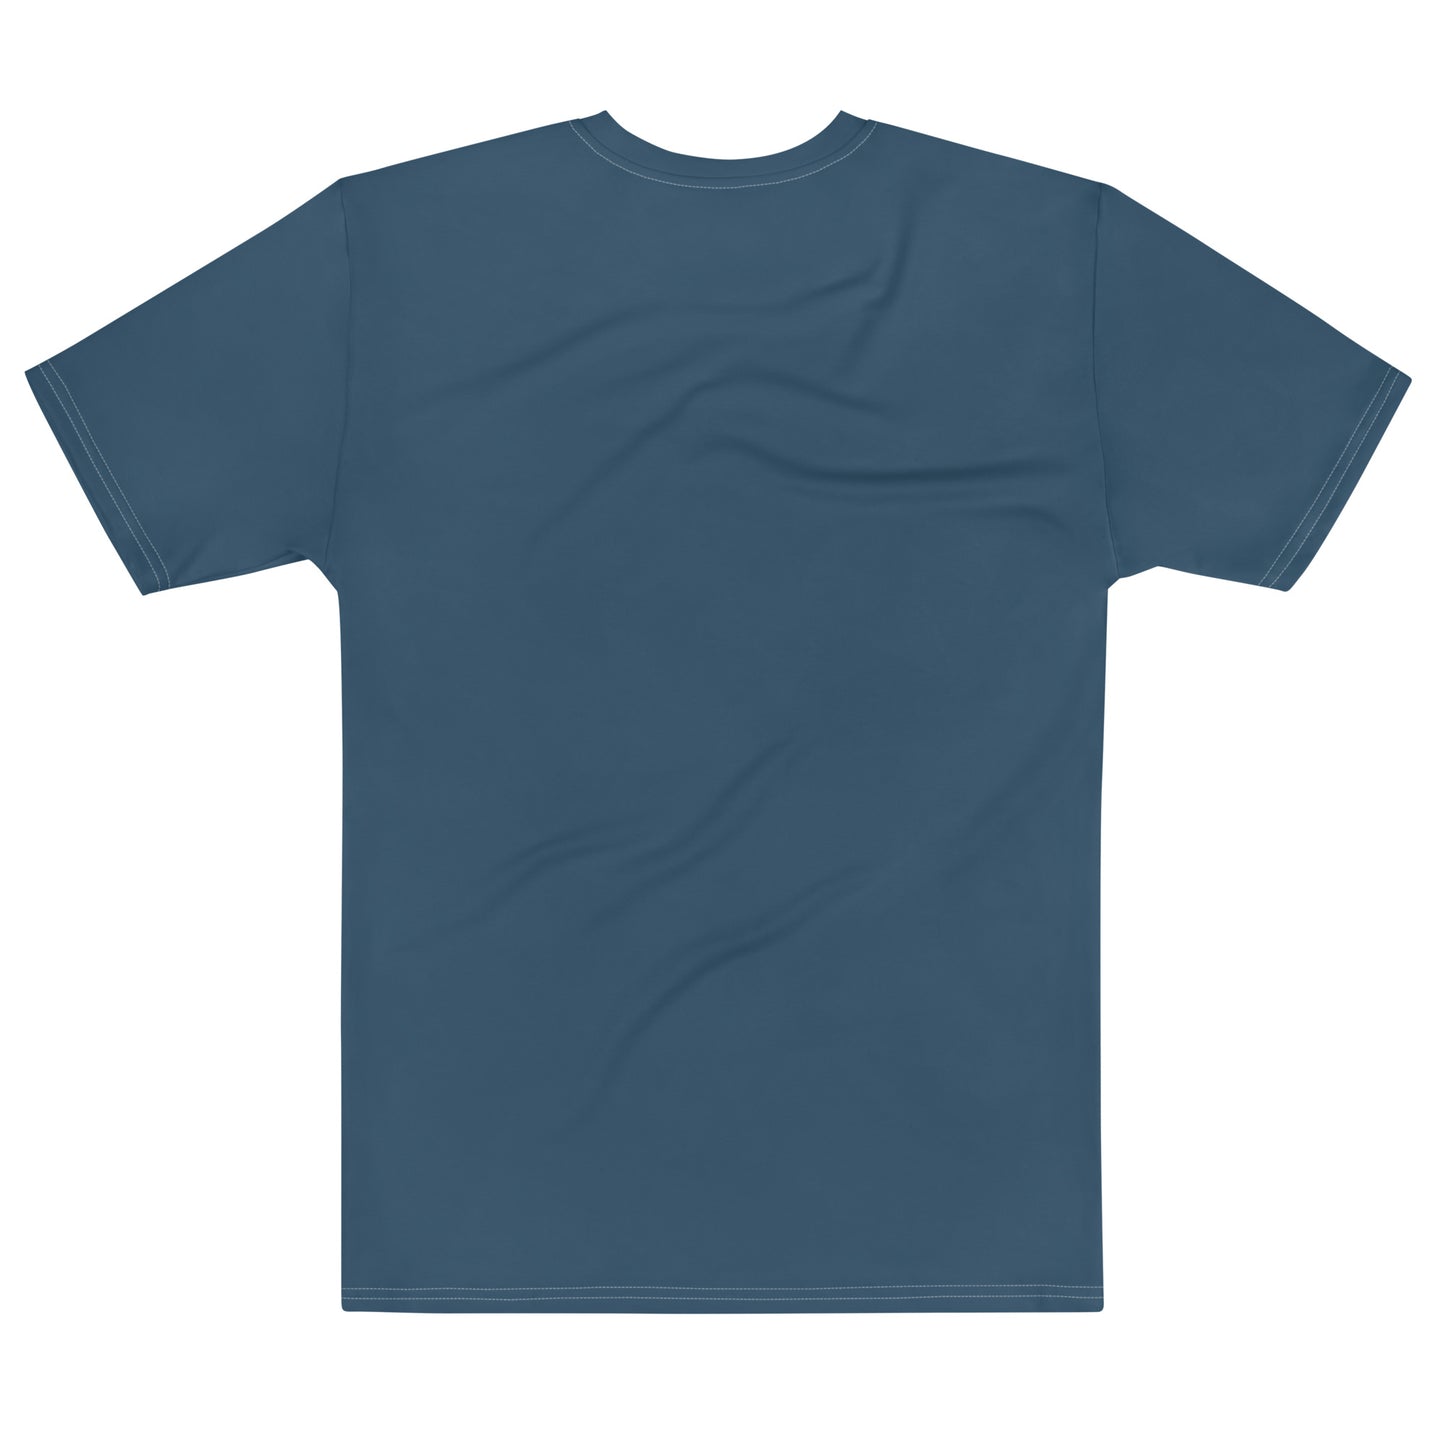 Ocean Blue Climate Change Global Warming Statement - Sustainably Made Men's Short Sleeve Tee